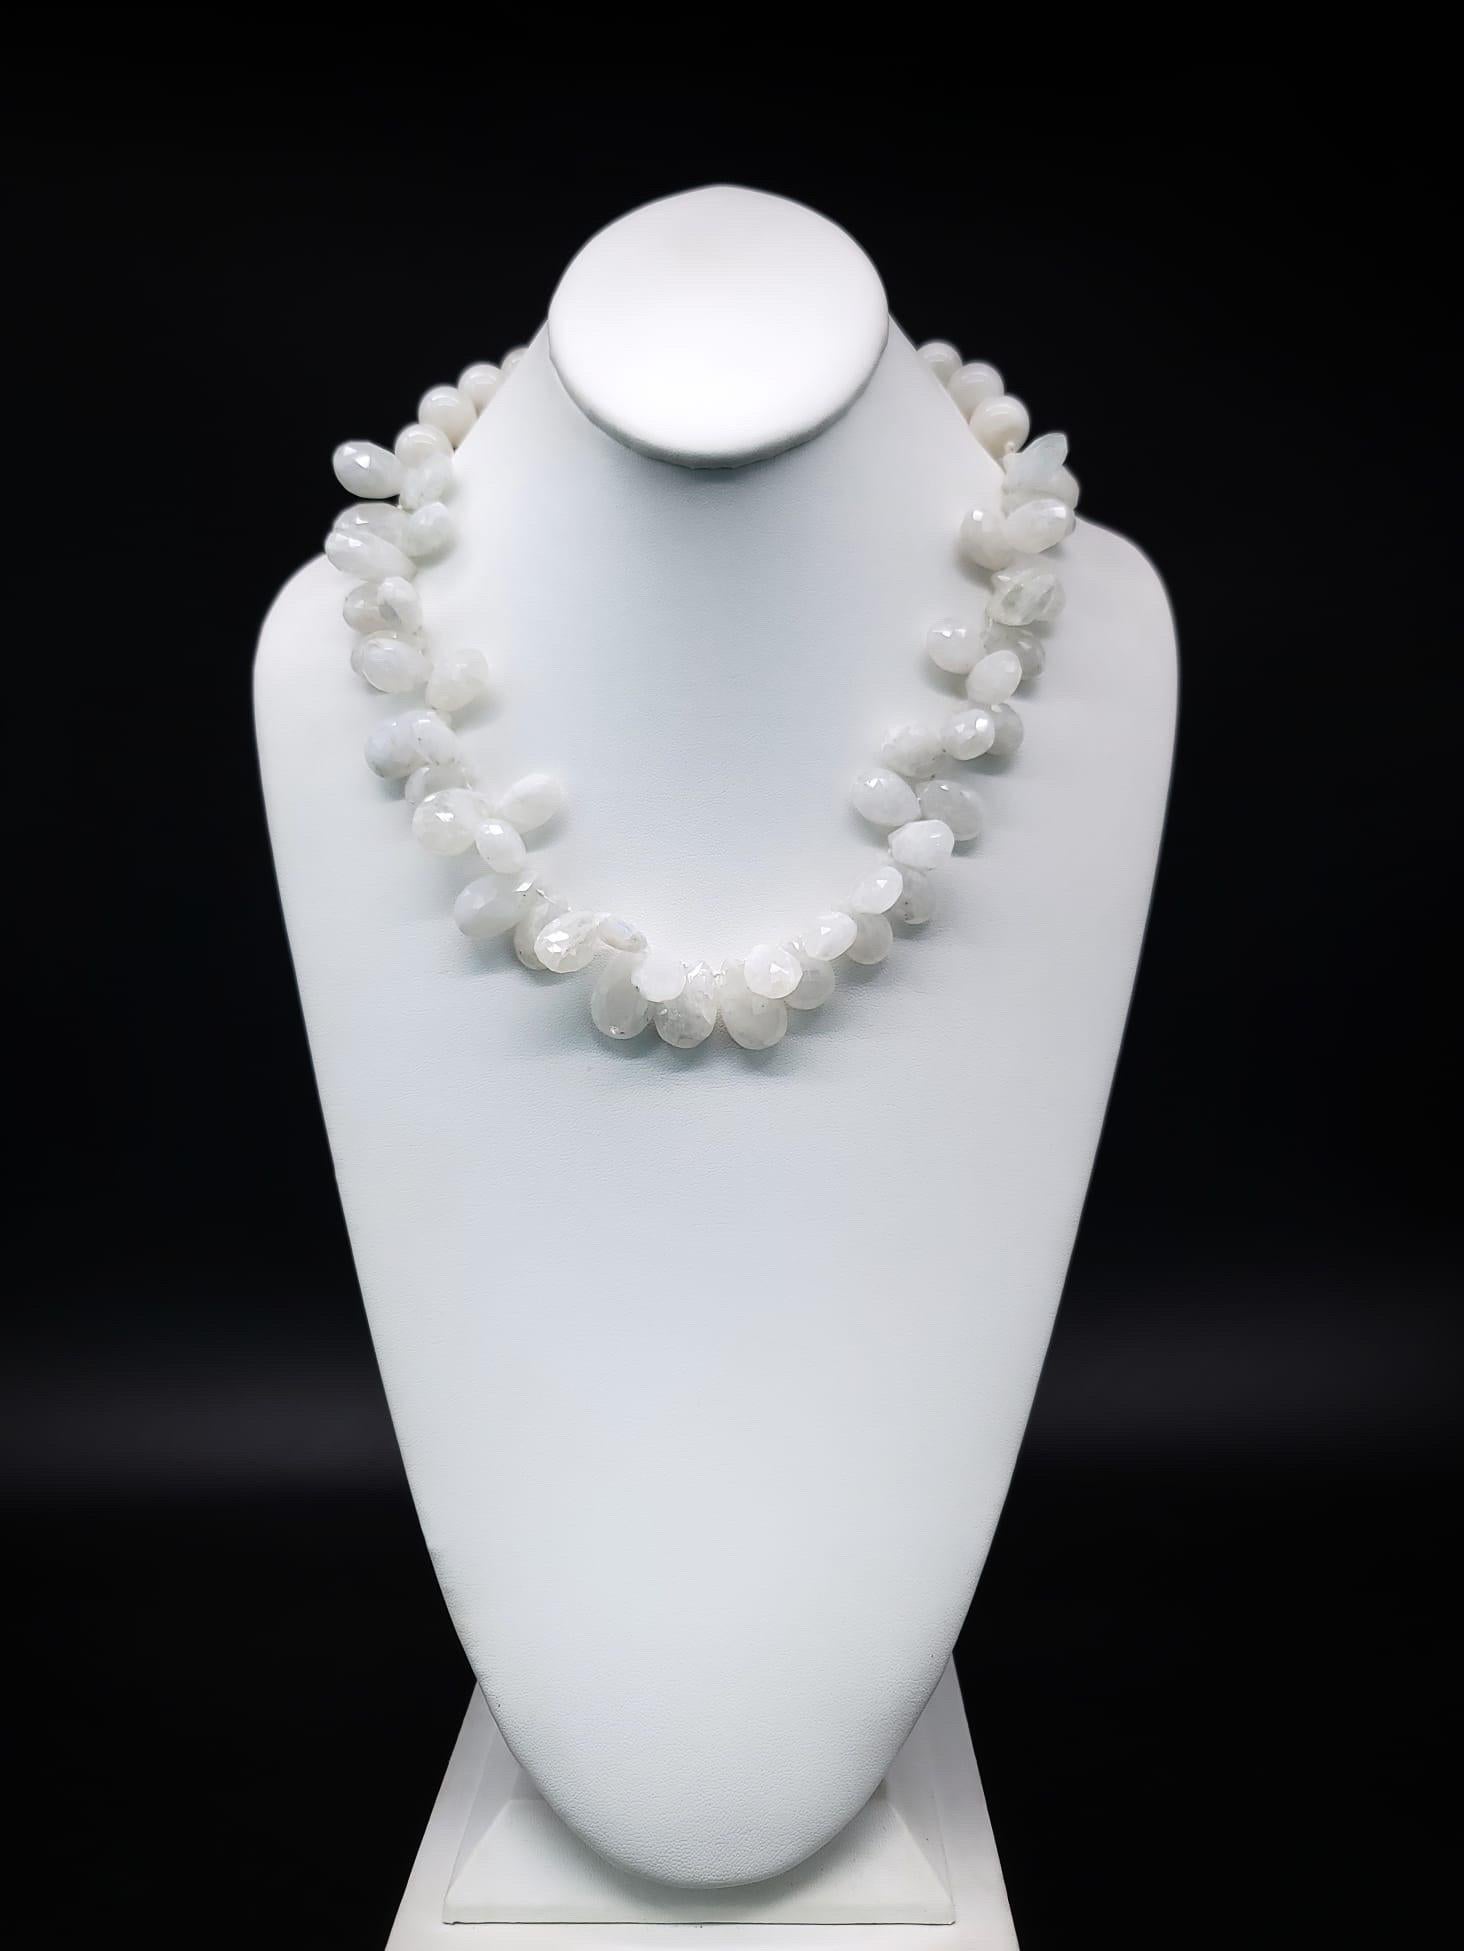 One-of-a-Kind

This exquisite necklace features a stunning ruffled Bibb of white moonstone, delicately surrounding the neck. The faceted tear-drop stones reflect the light beautifully, reminding us of how the stone got its name. Supporting this